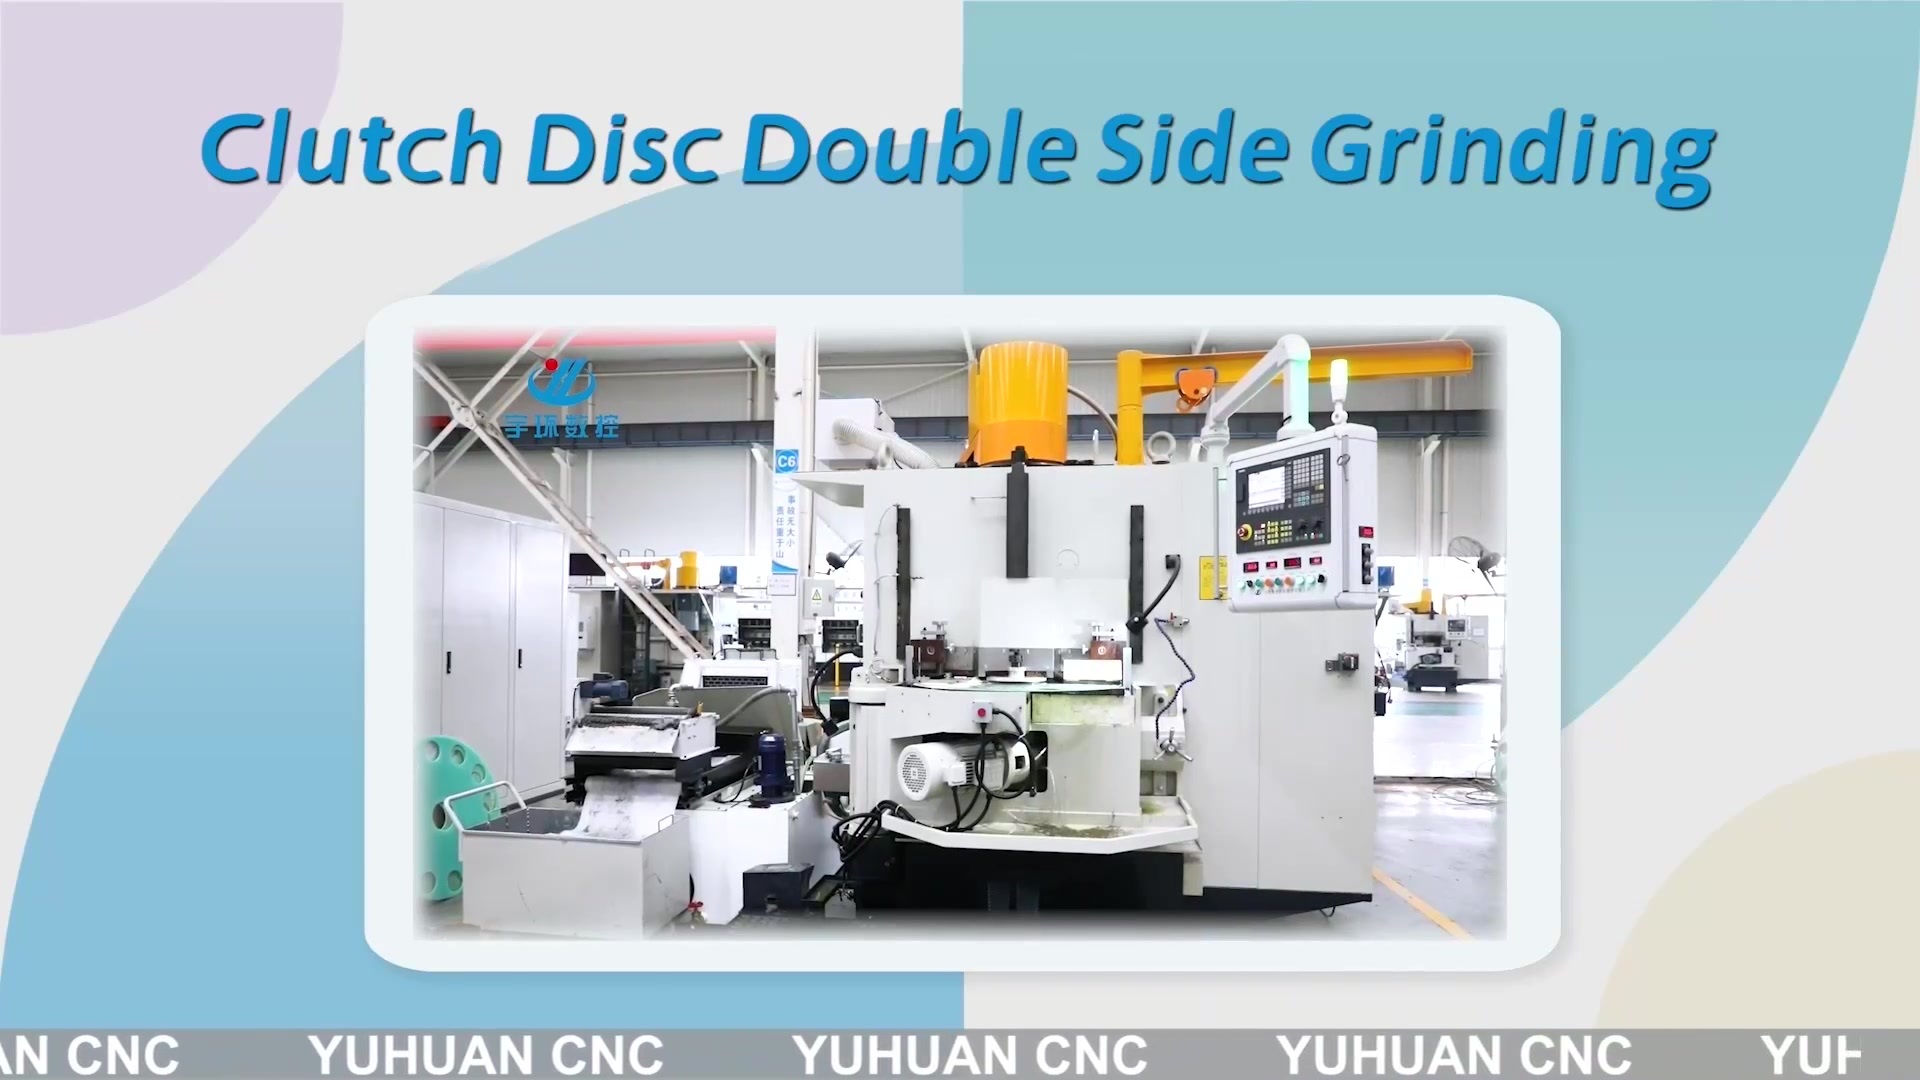 （750A）Clutch Disc Double Side Grinding.mp4